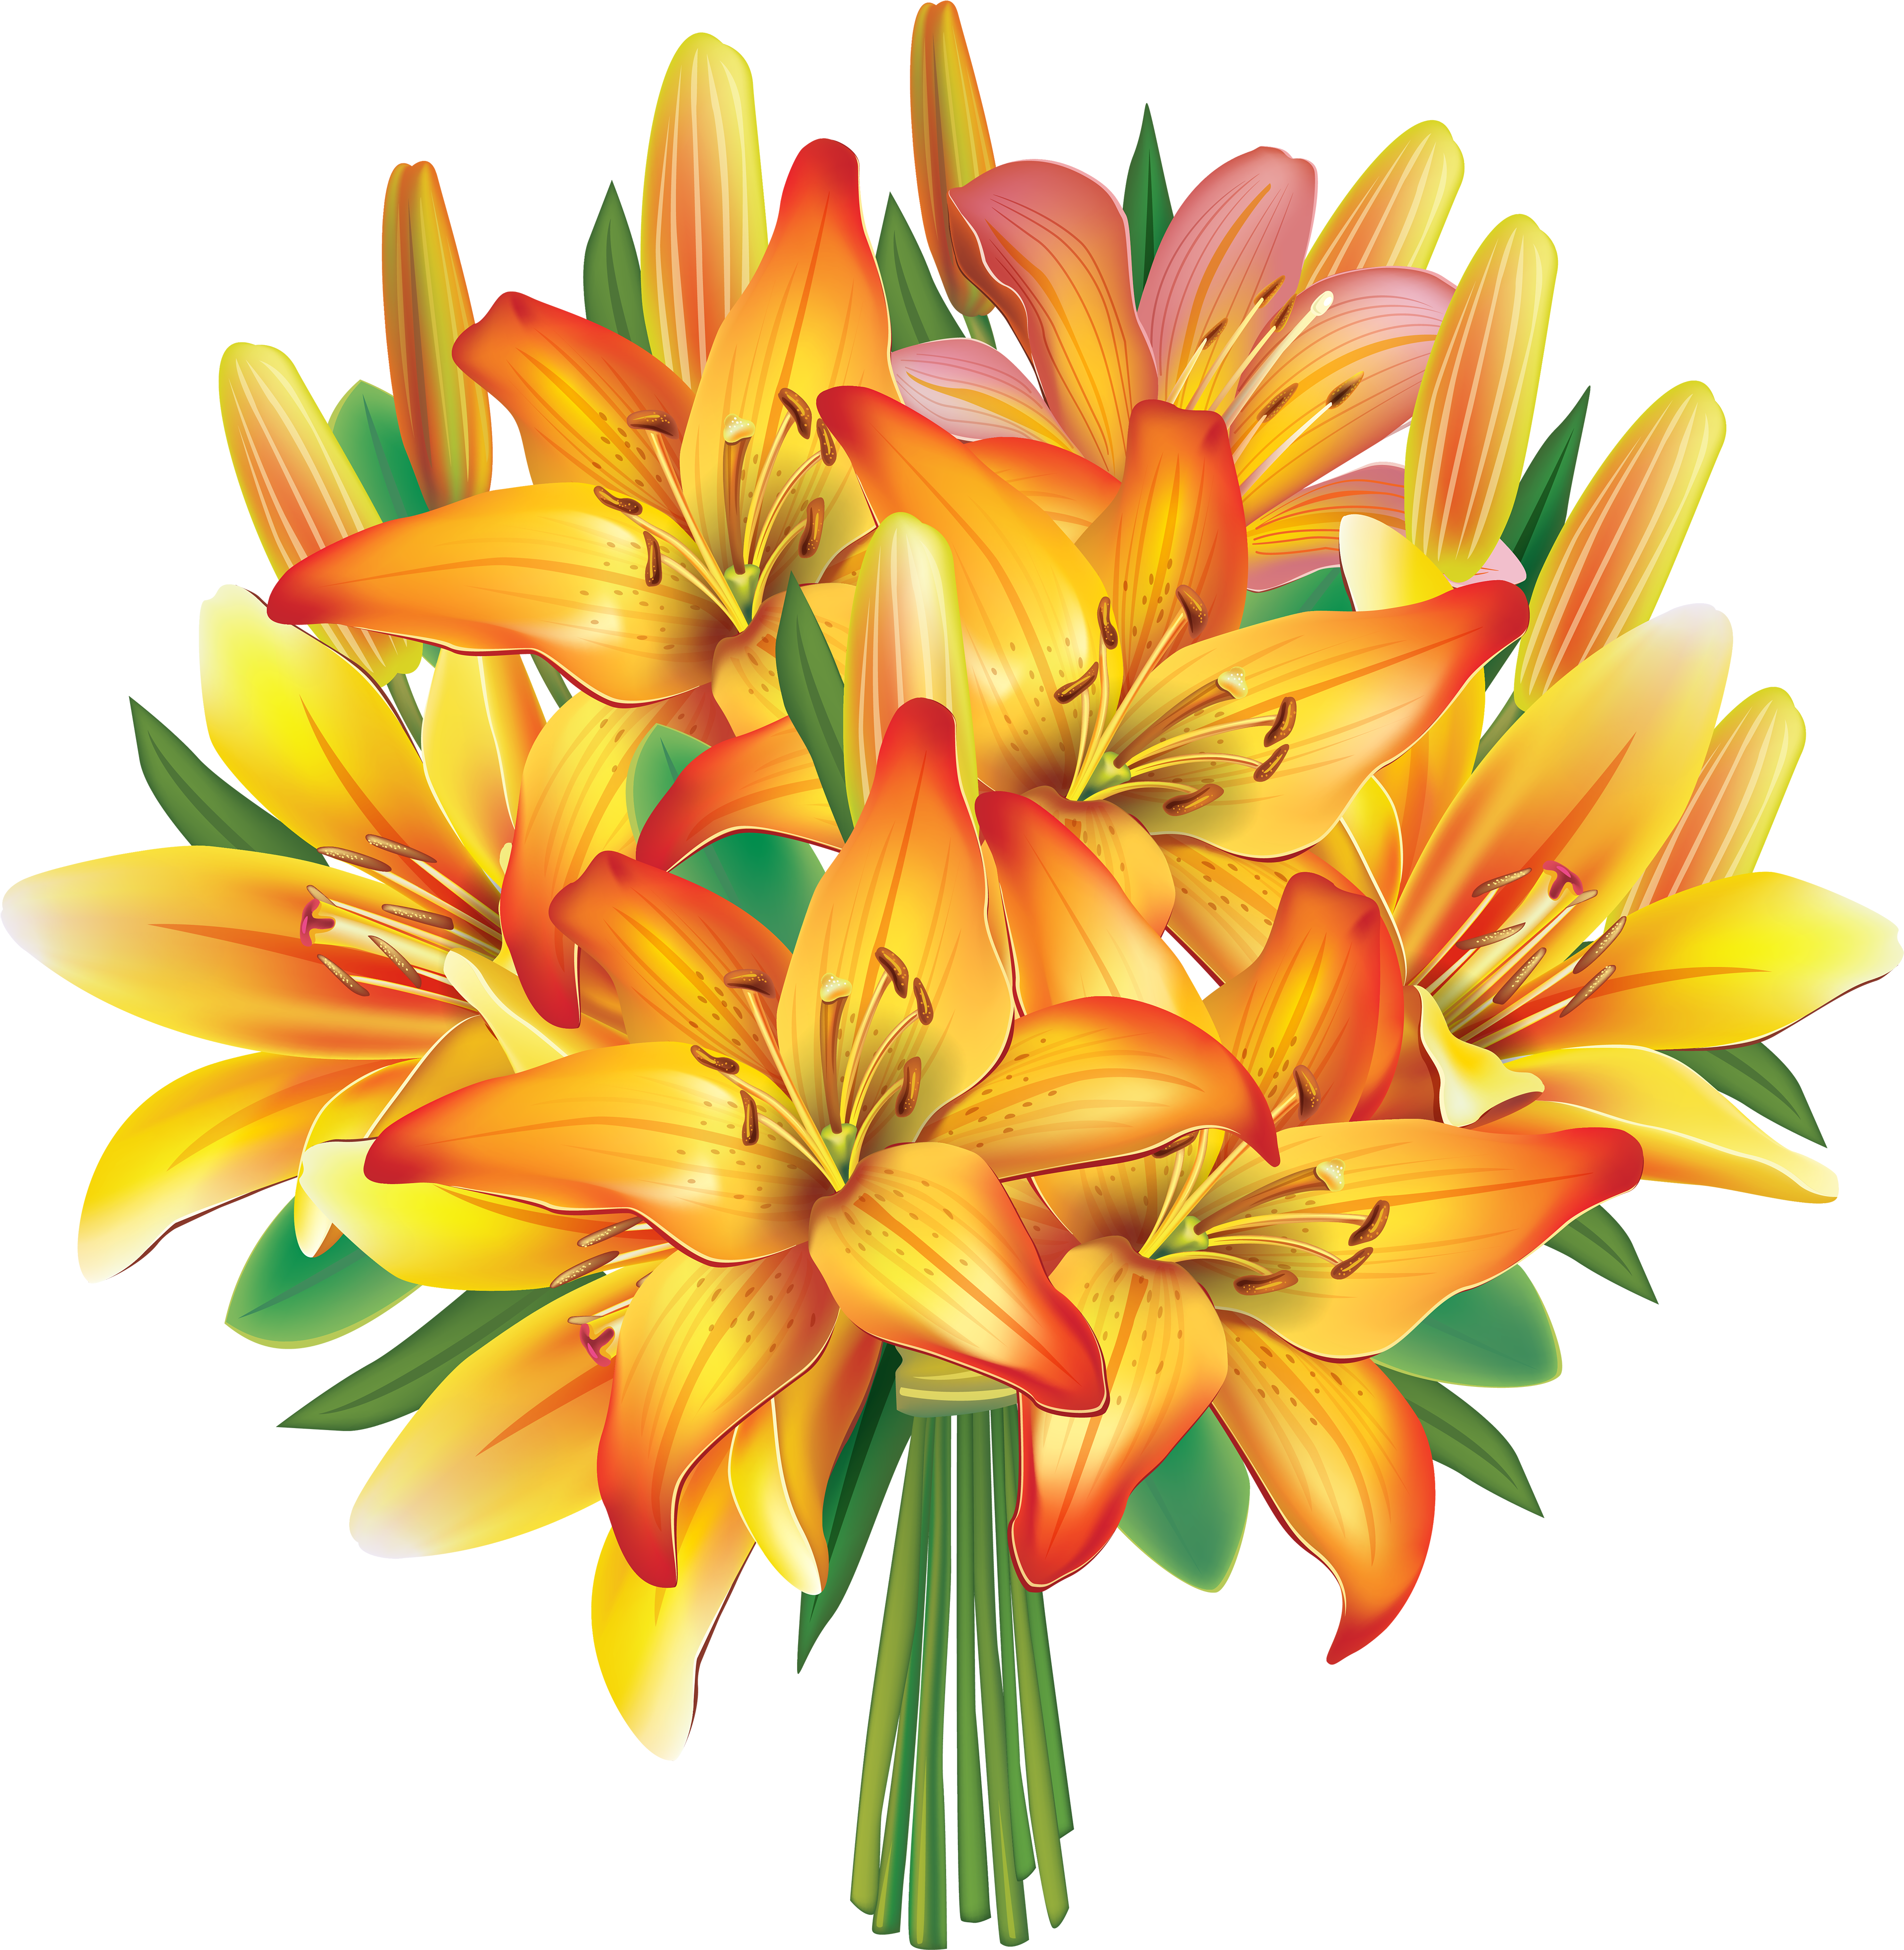 Yellow Lilies Flowers Bouquet Png - Yellow Lily Flowers Bouquet (3903x4000)